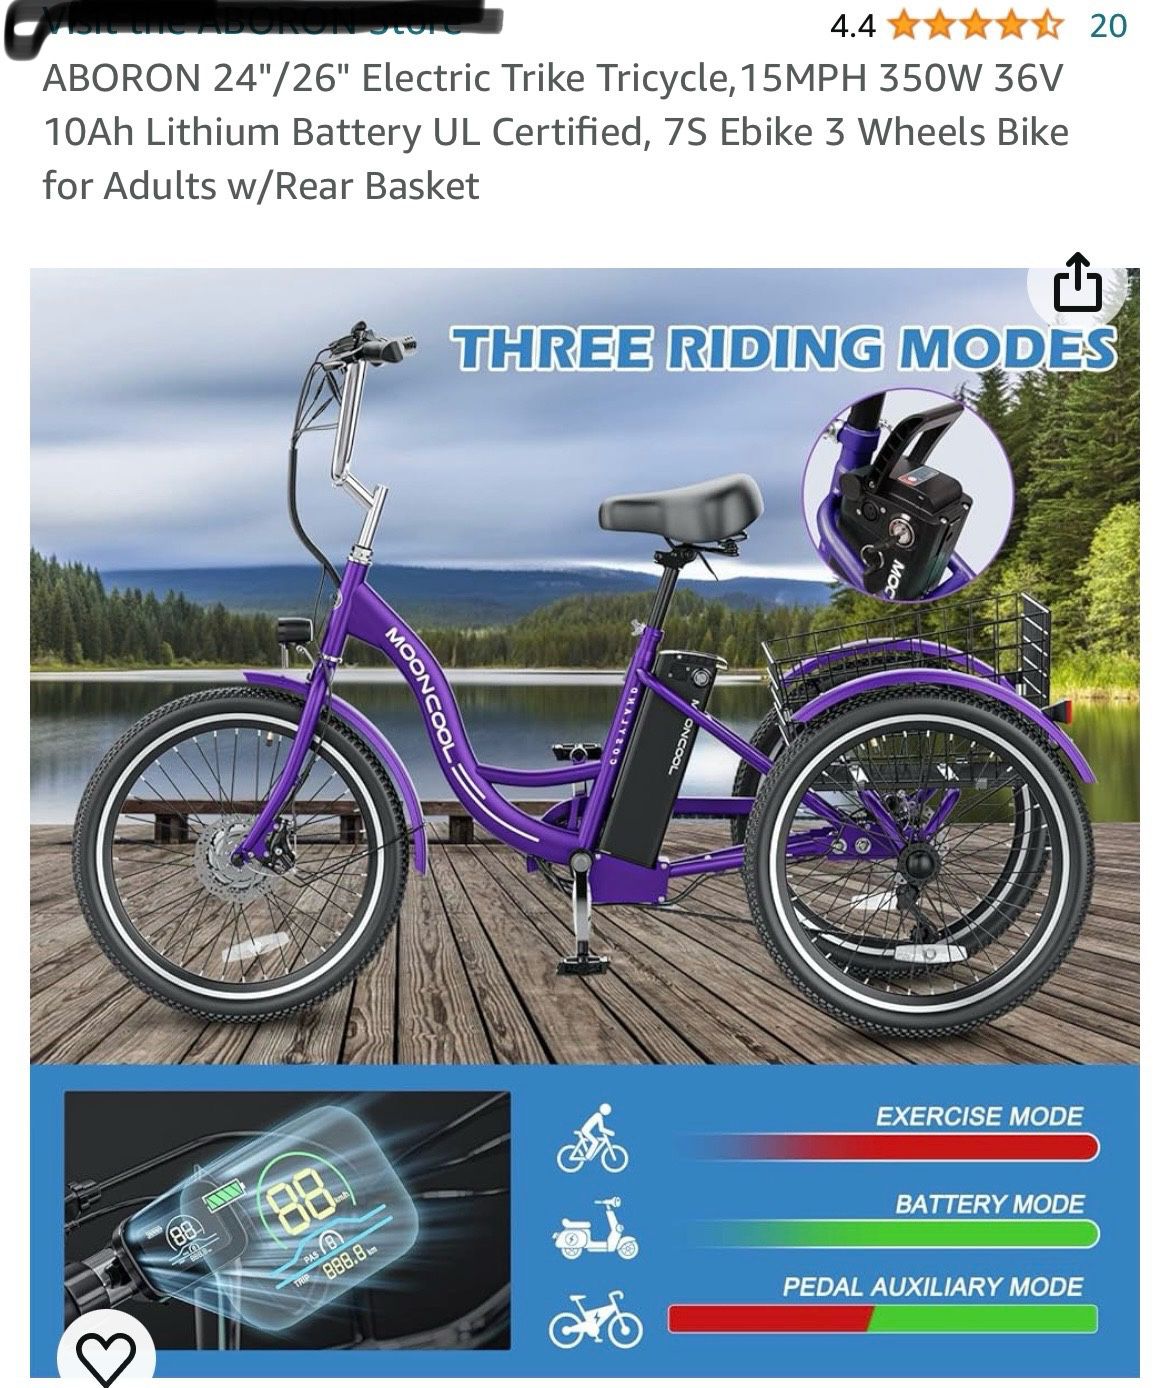 ABORON 24"/26" Electric Trike Tricycle,15MPH 350W 36V 10Ah Lithium Battery UL Certified, 7S Ebike 3 Wheels Bike for Adults w/Rear Basket